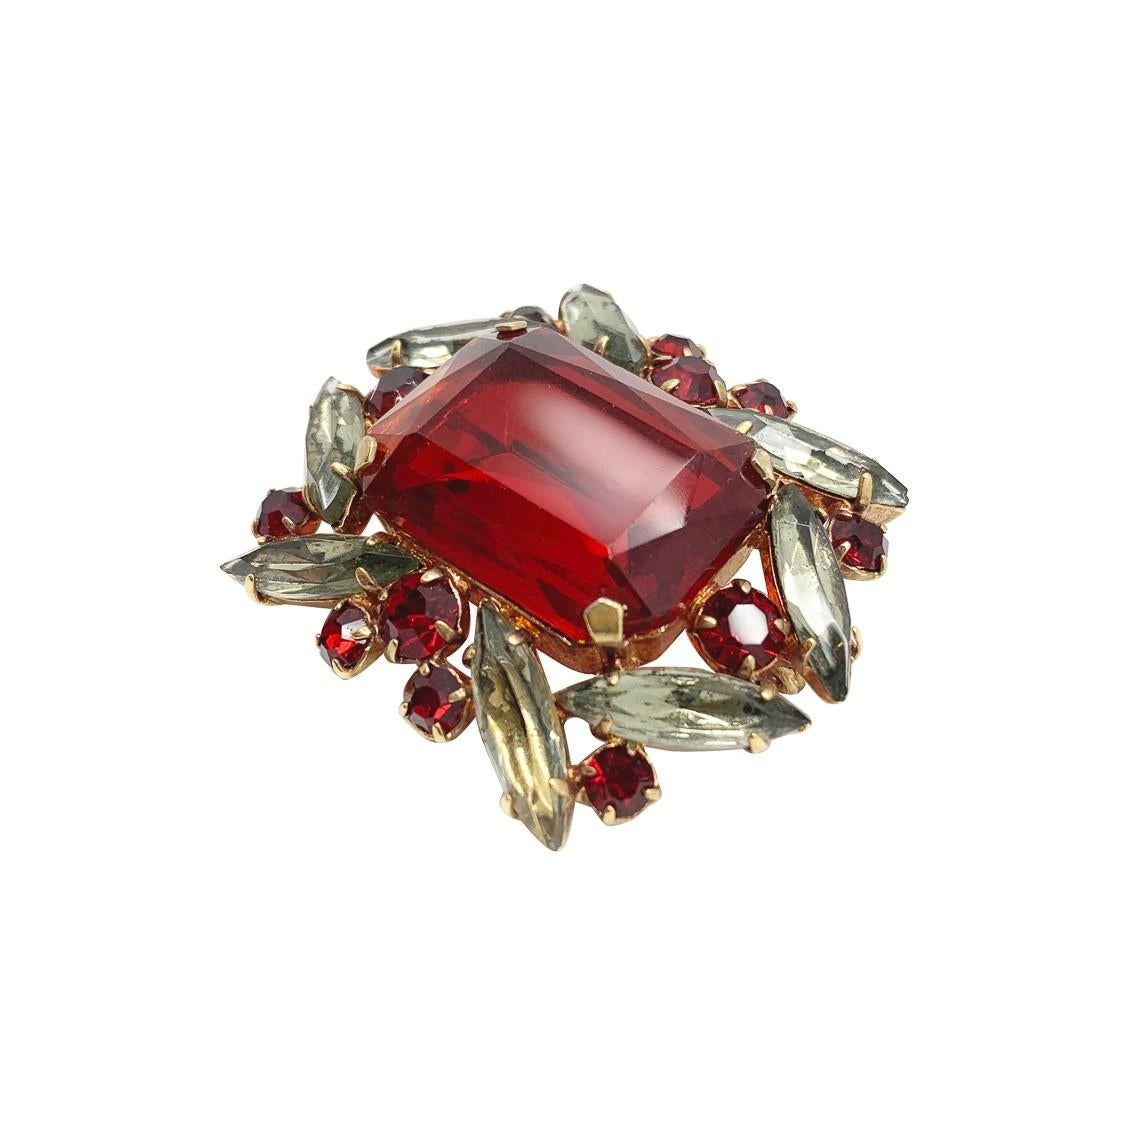 A vintage red crystal brooch from the mid century, presenting a rare and beautiful combination of deep red fancy cut crystals accented with grey marquise stones. Totally alluring and beautifully made. A perfect piece to adorn yourself with and sip